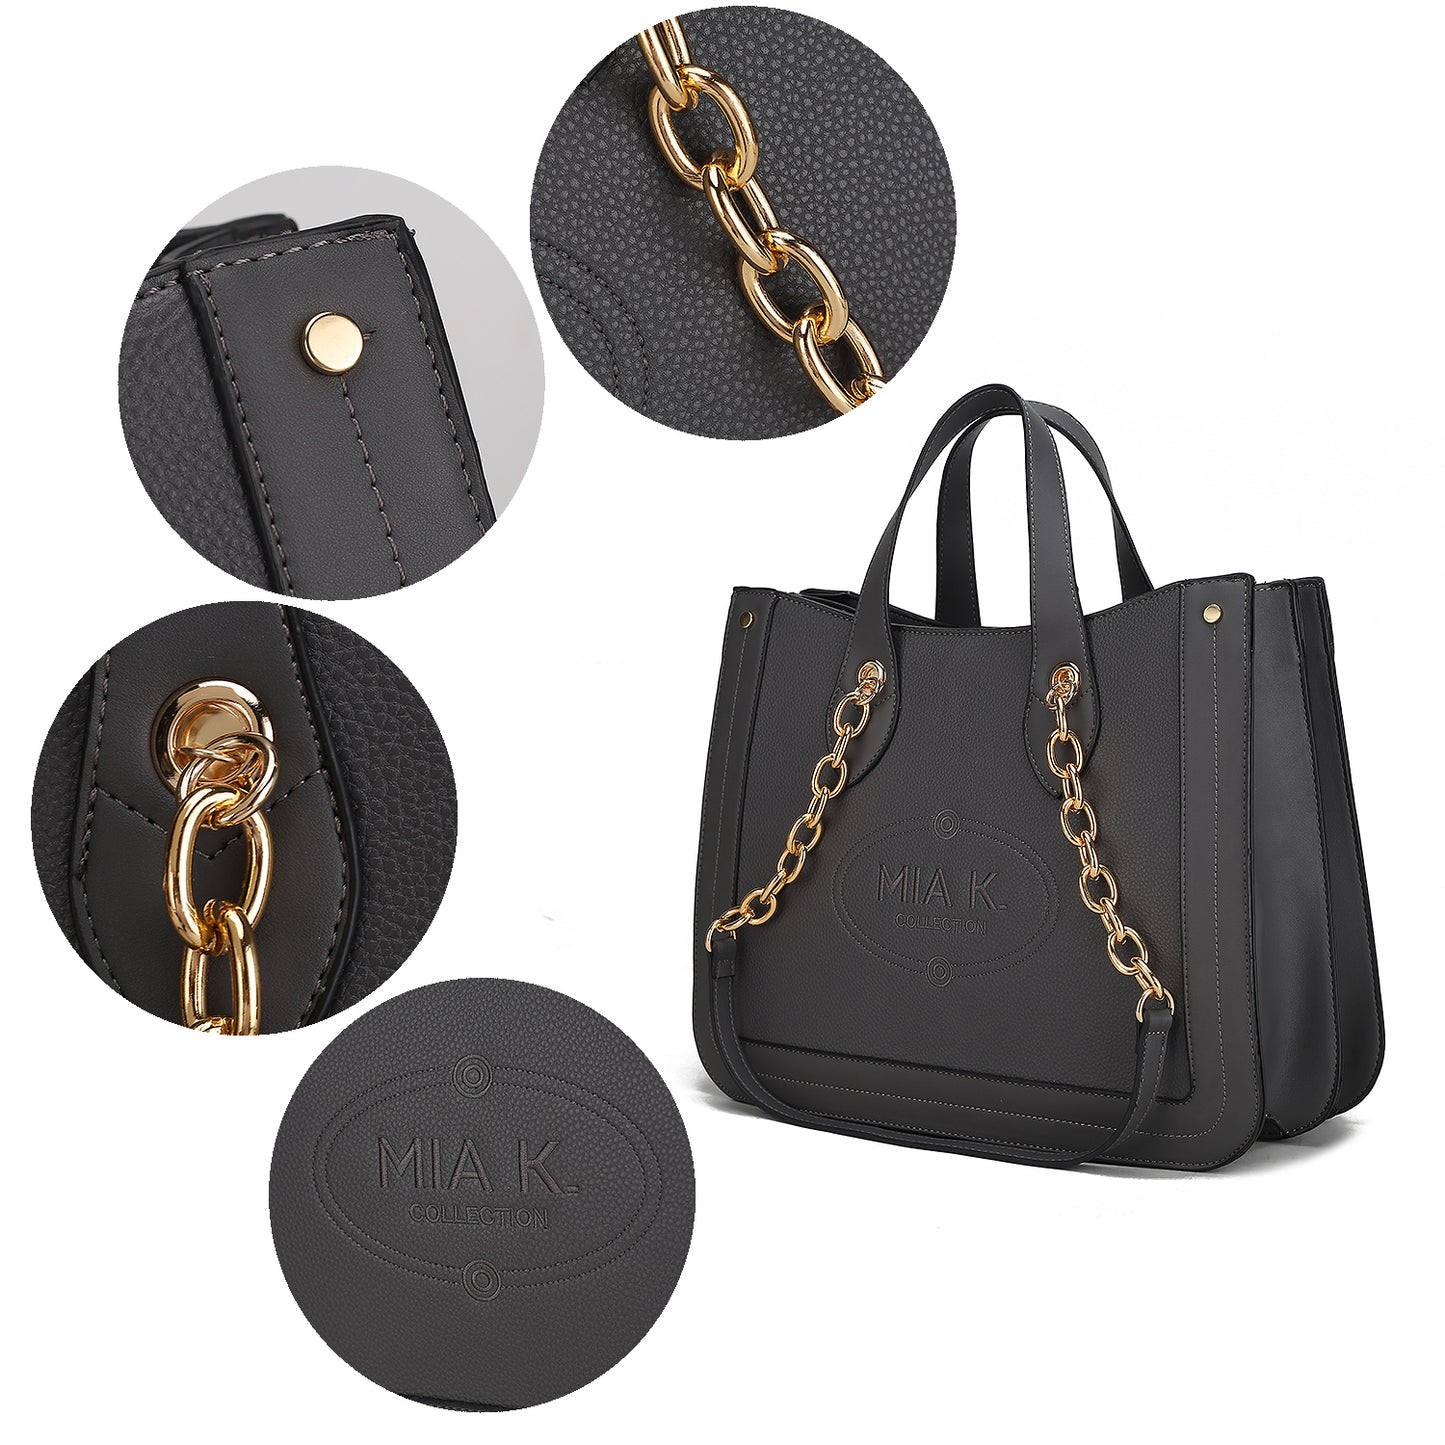 The Pink Orpheus Stella Vegan Leather Women Tote Bag is a black tote bag with a gold chain.